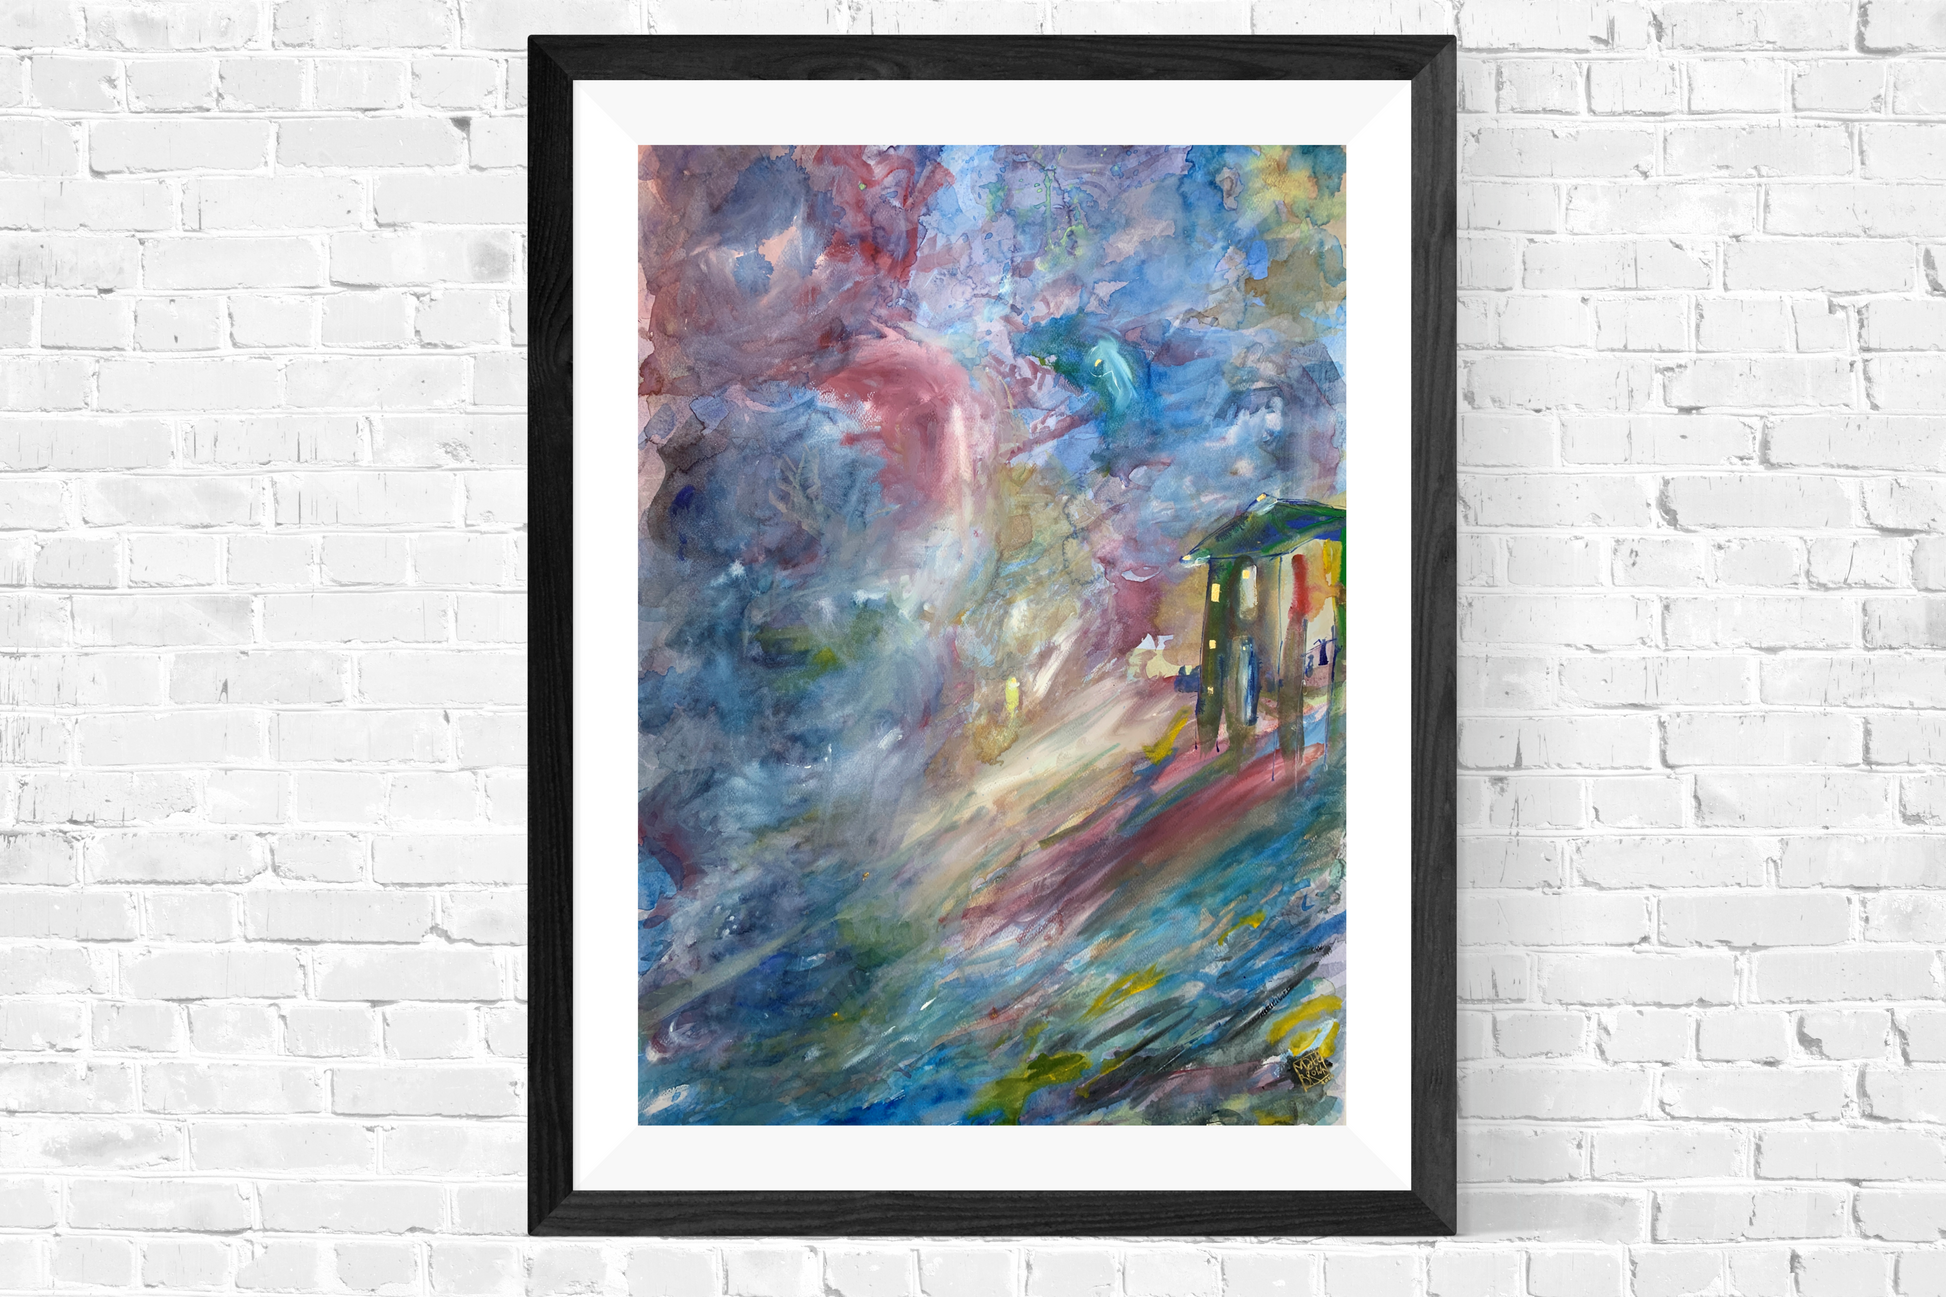 New original and striking artwork in watercolour and gouache inspired by Edvard Munch